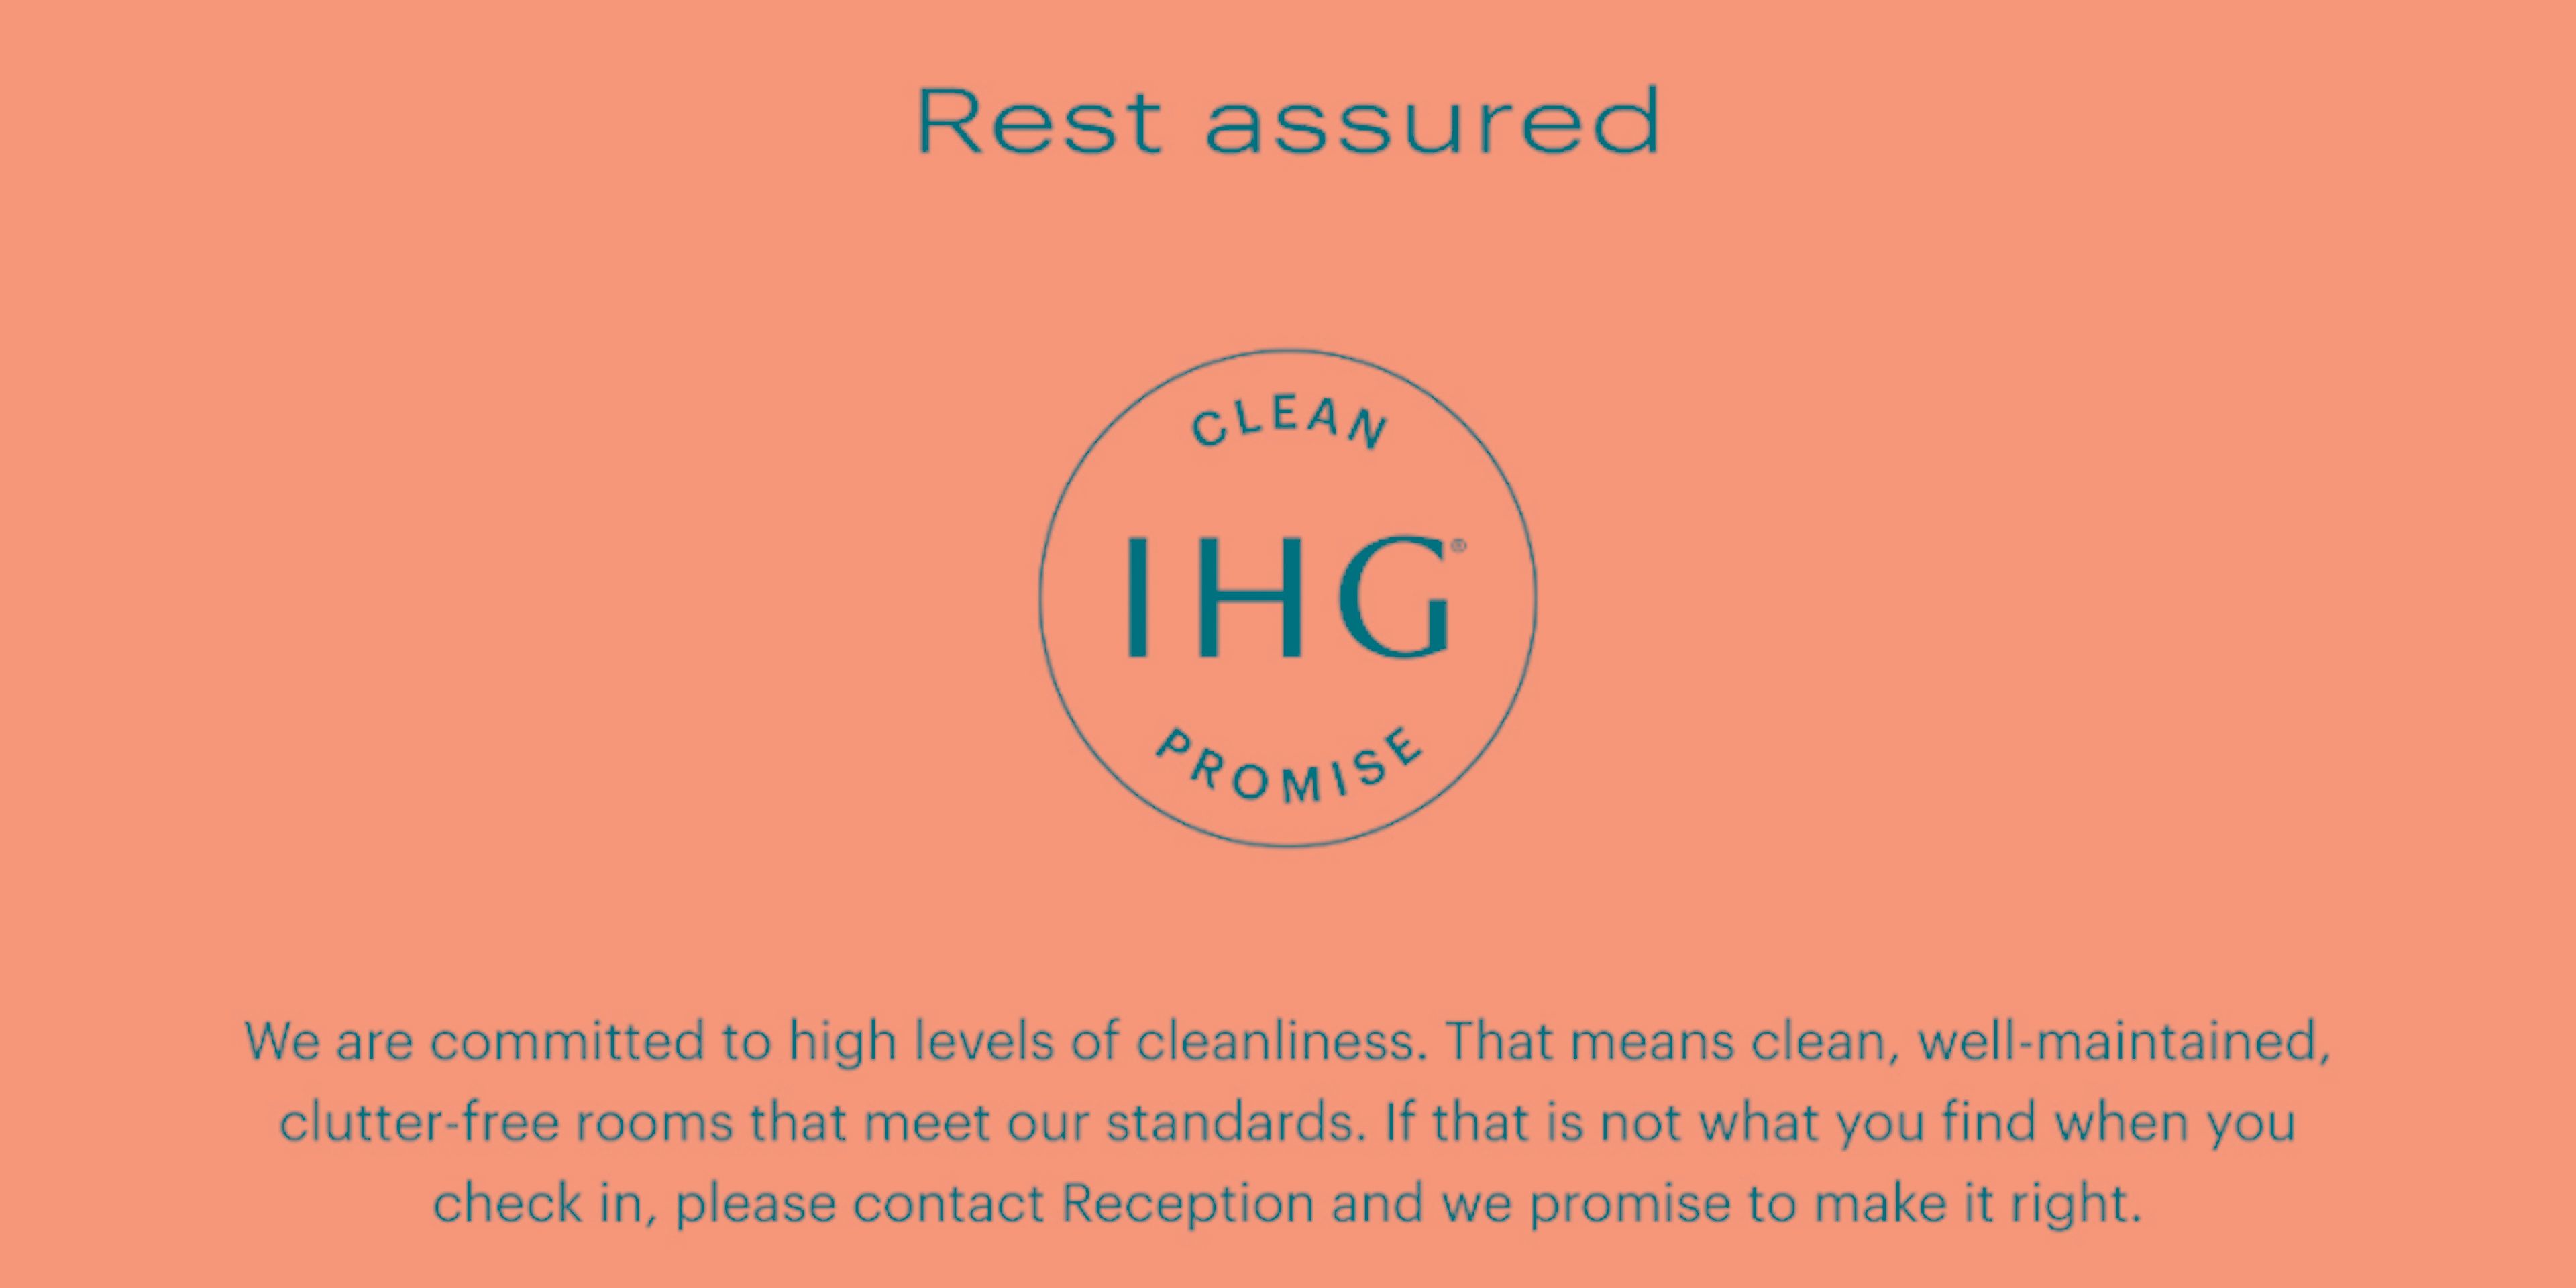 ‘We are committed to high levels of cleanliness. That means clean, well-maintained, clutter-free rooms that meet our standards. If that is not what you find when you check in, please contact Reception and we promise to make it right.’